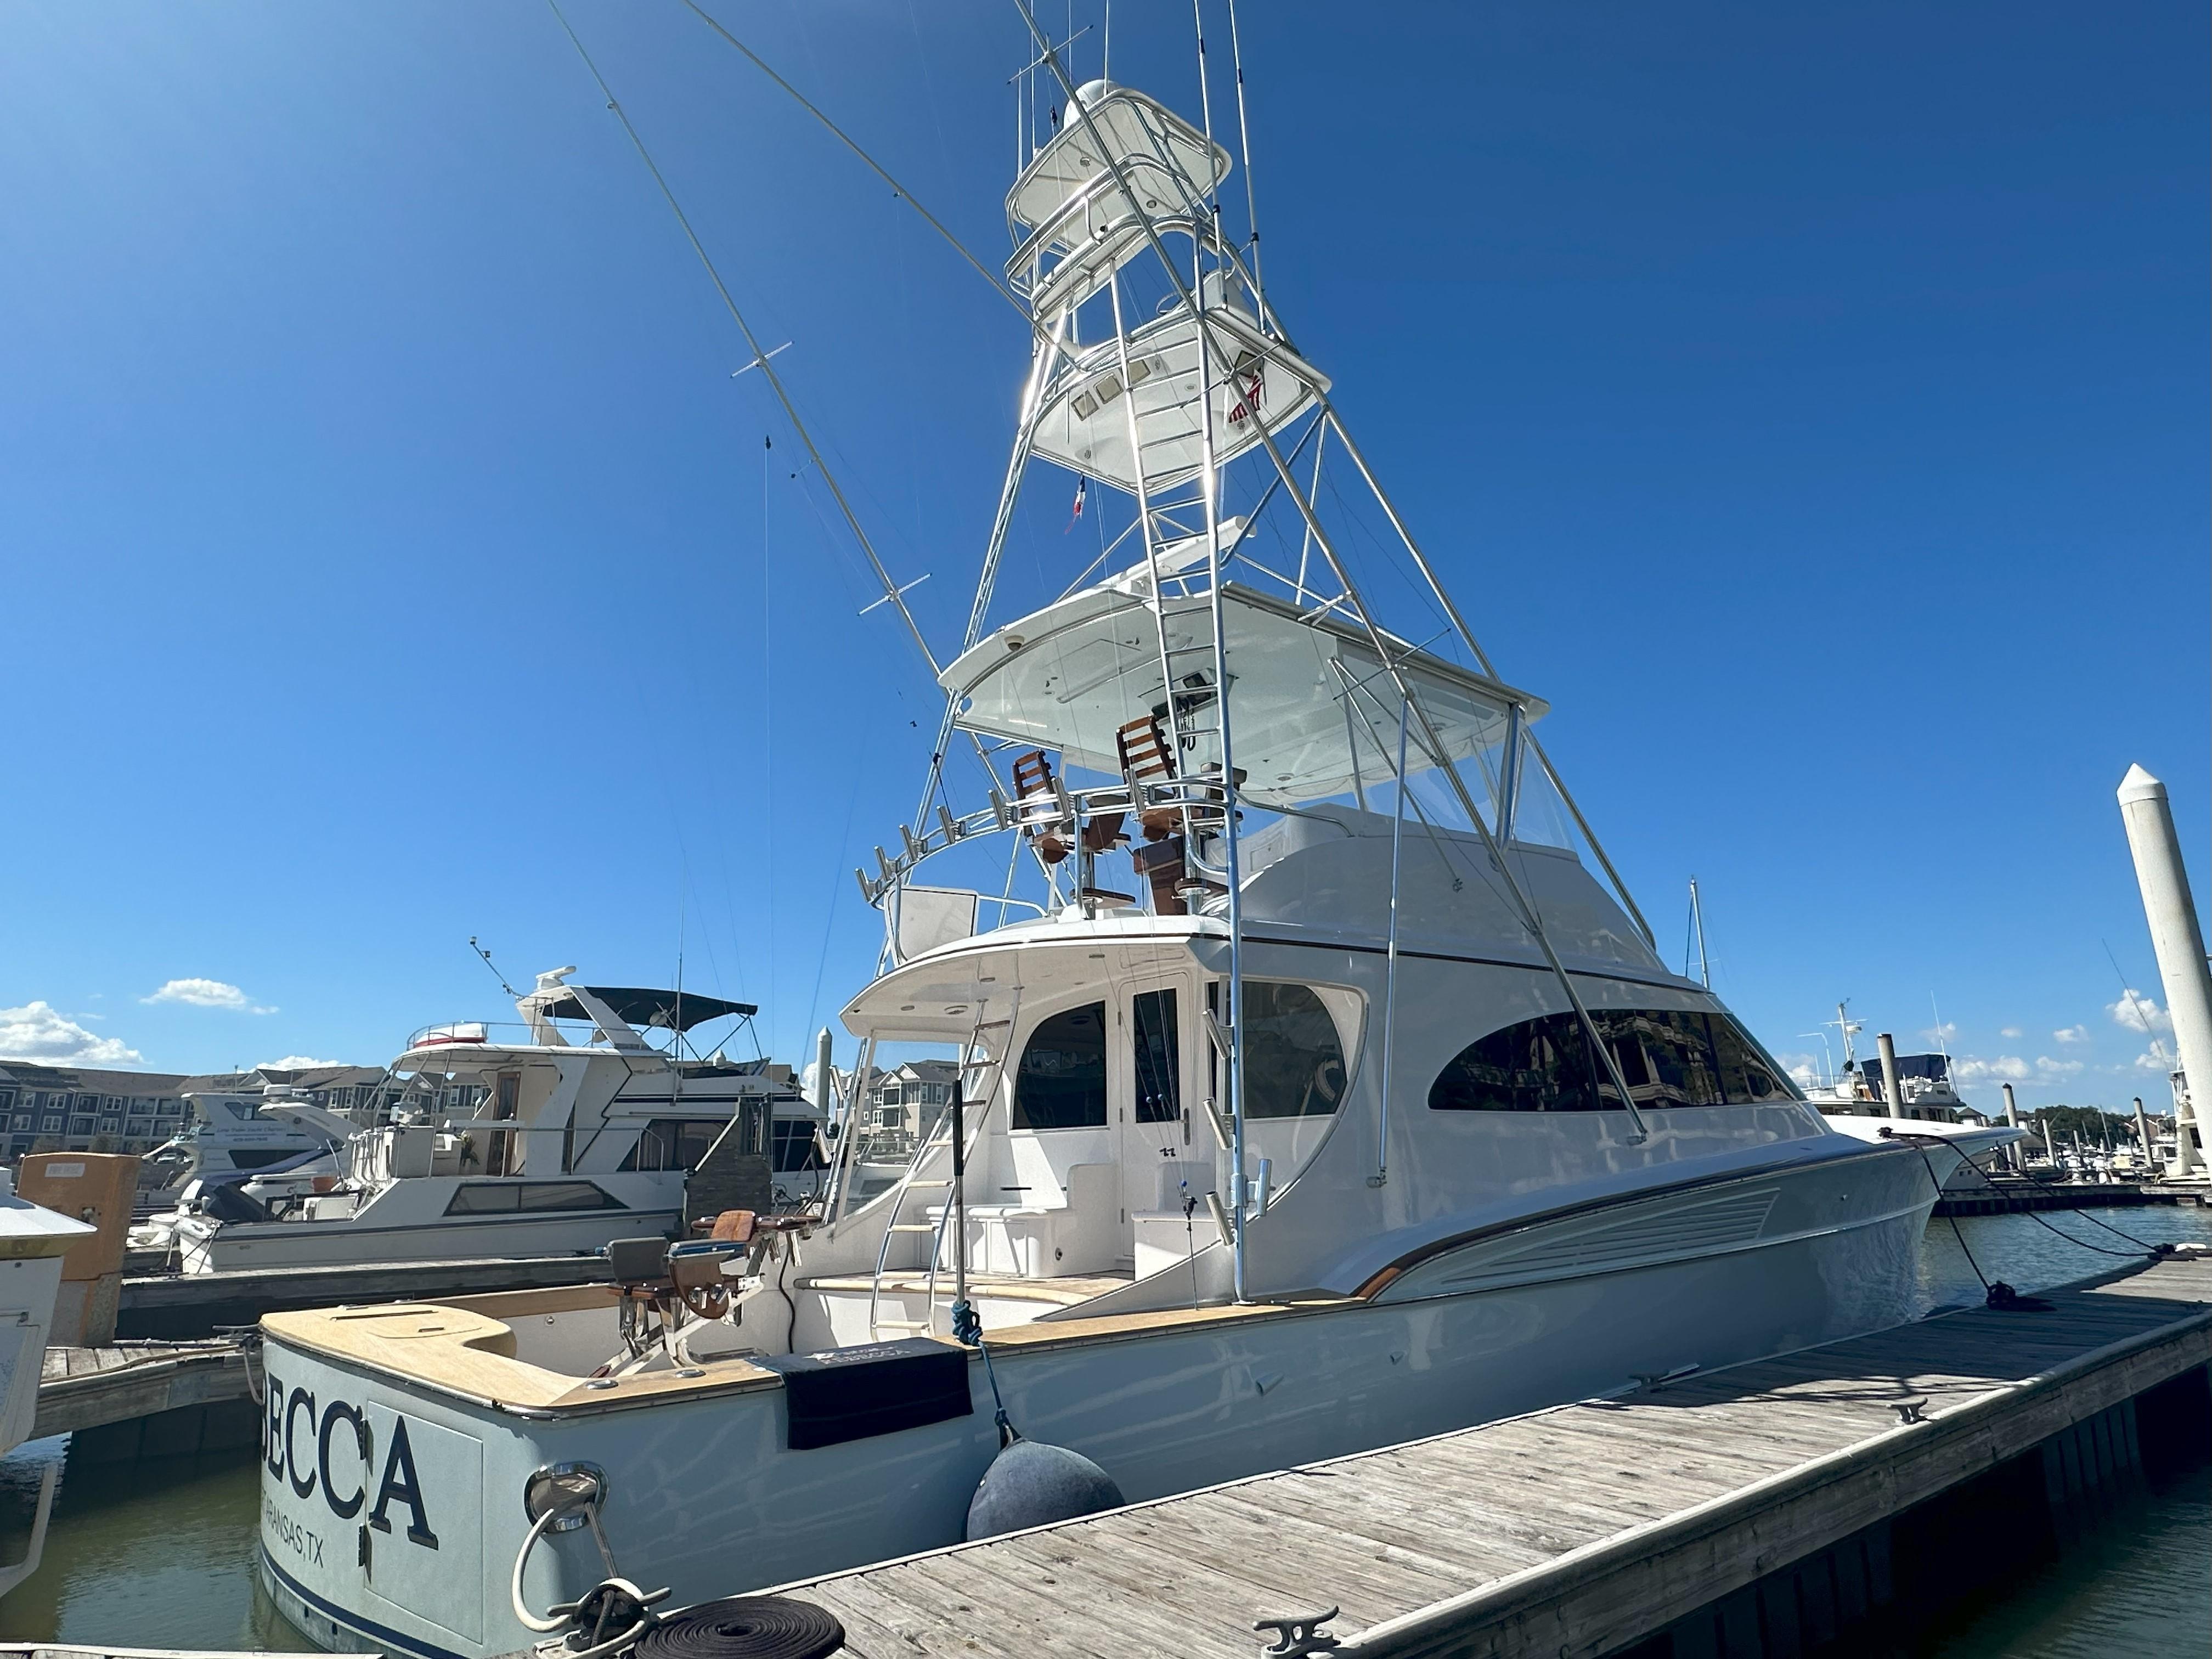 Rare Feadship Sportfishing Boat Relaunched